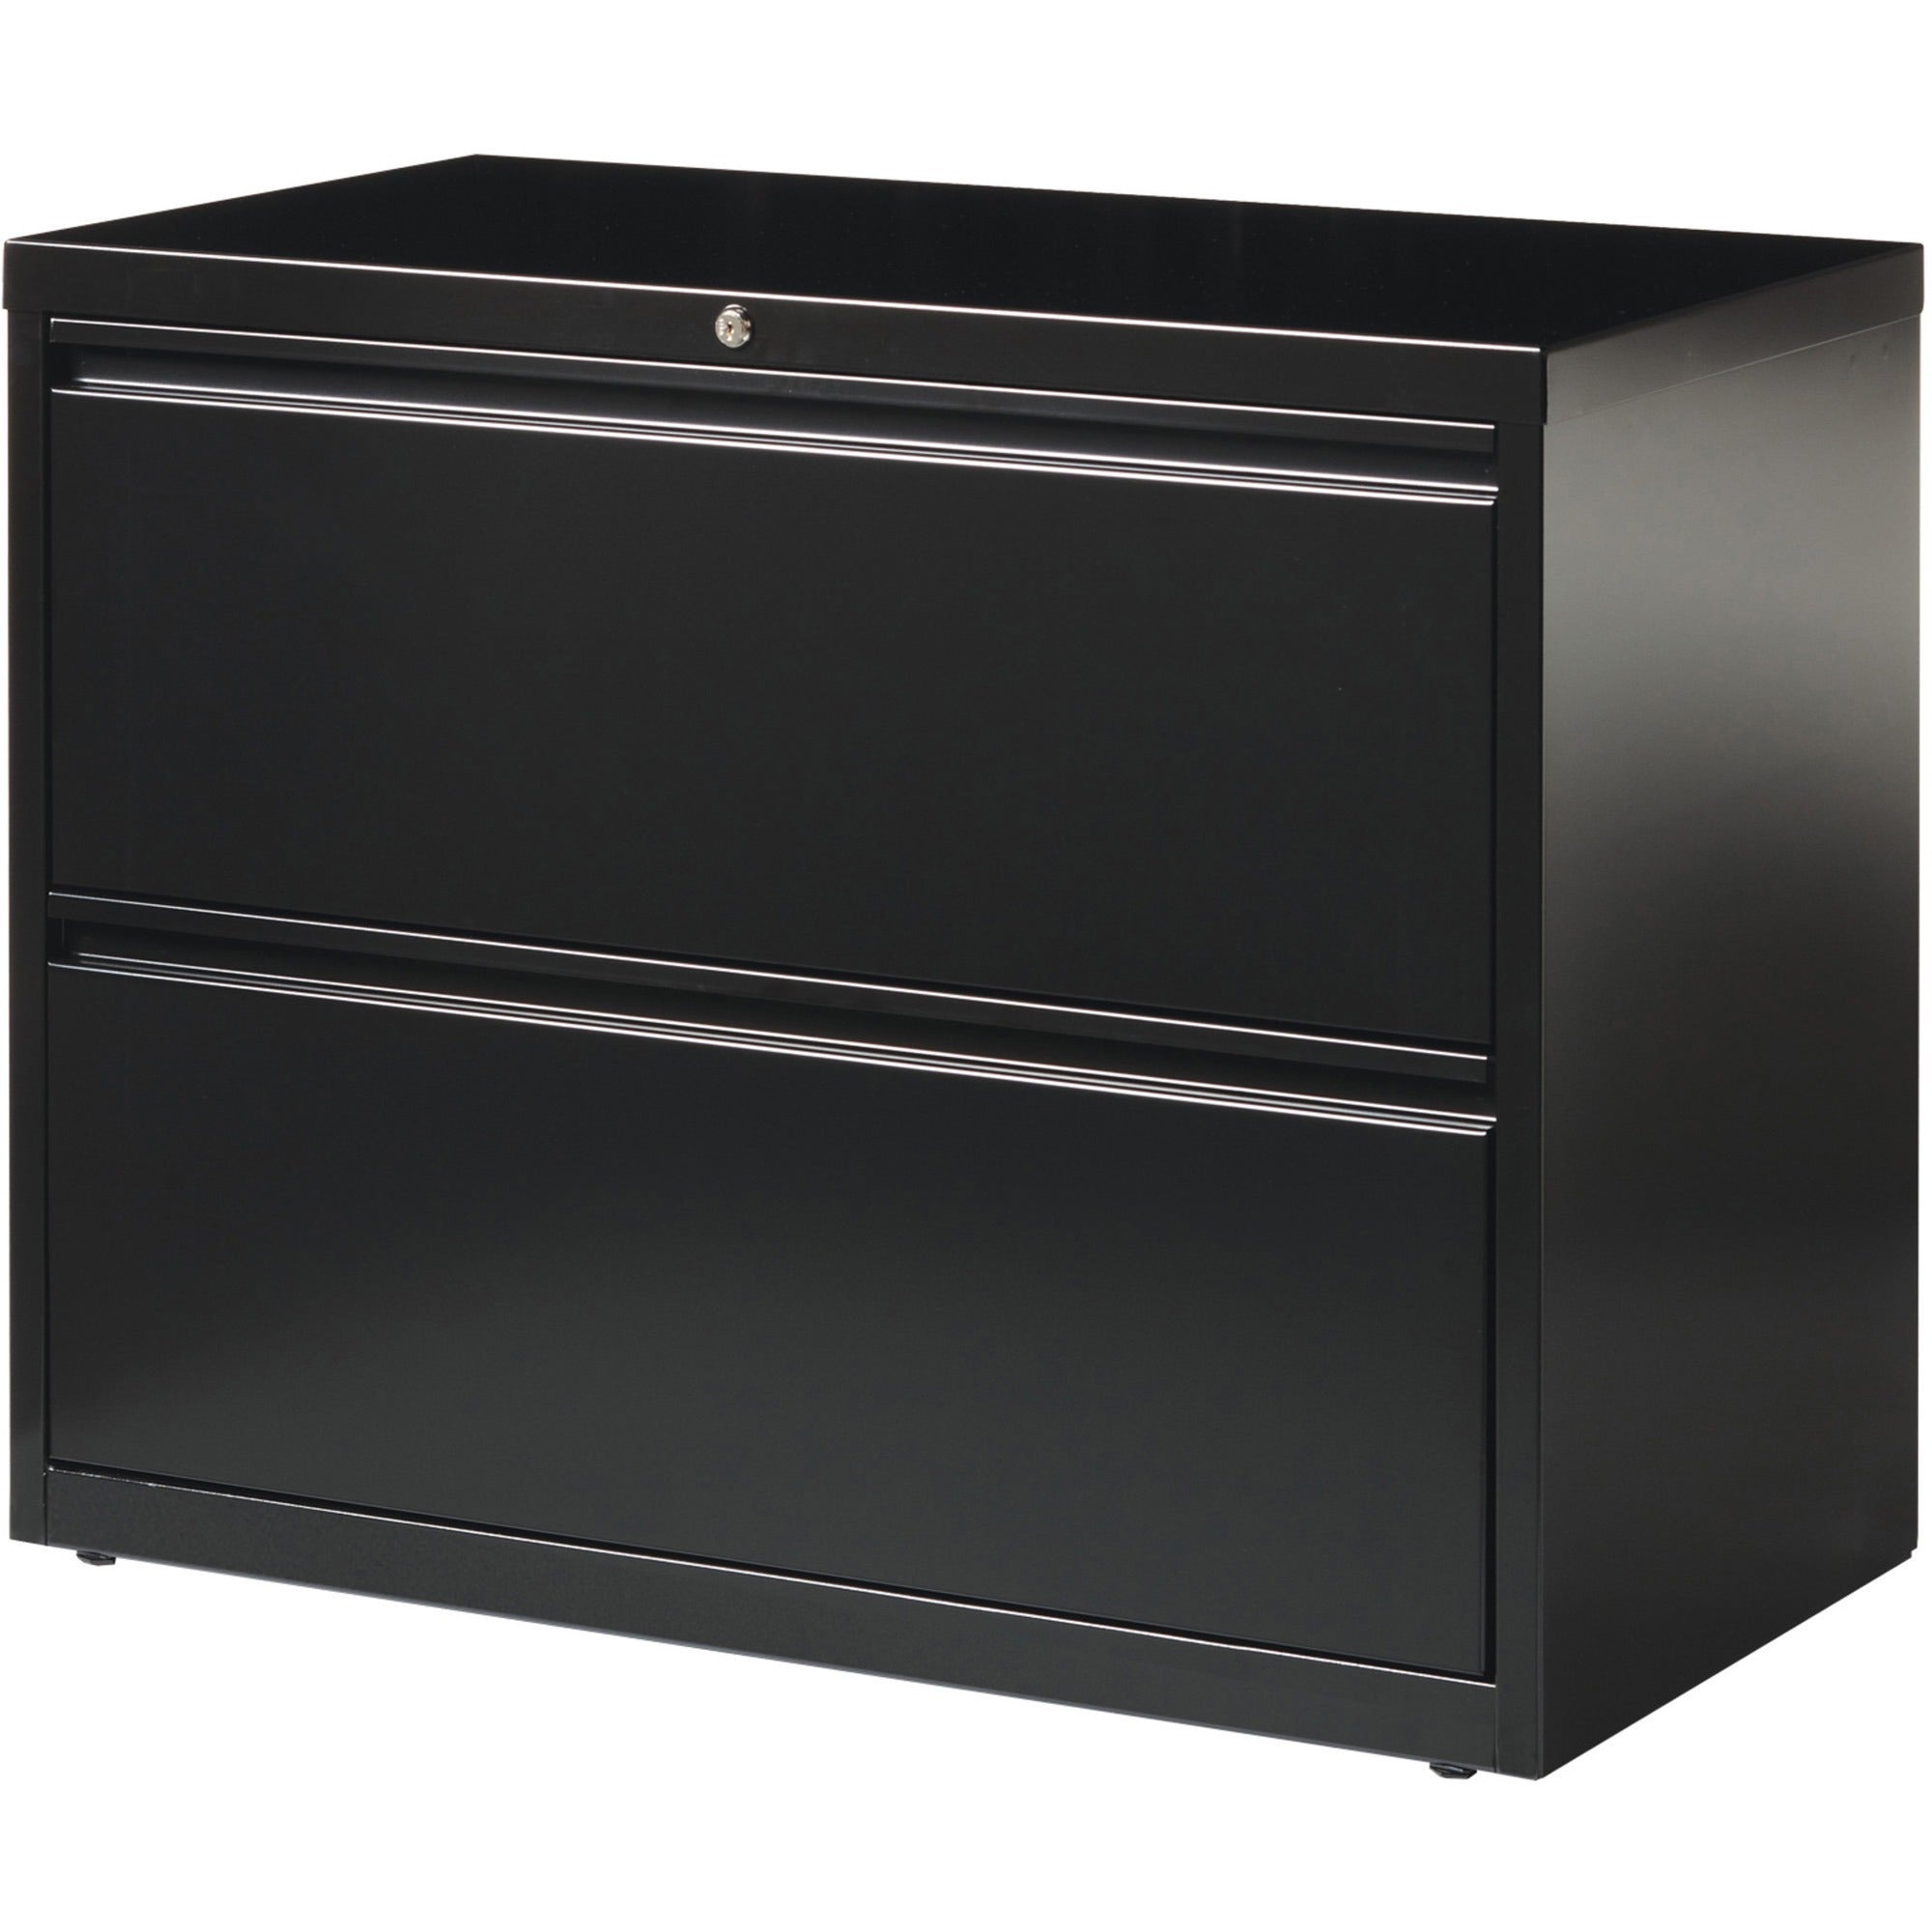 Lorell Fortress Series Lateral File - 36" x 18.6" x 28.1" - 2 x Drawer(s) for File - Letter, Legal, A4 - Lateral - Leveling Glide, Label Holder, Ball-bearing Suspension, Interlocking - Black - Steel - Recycled - 